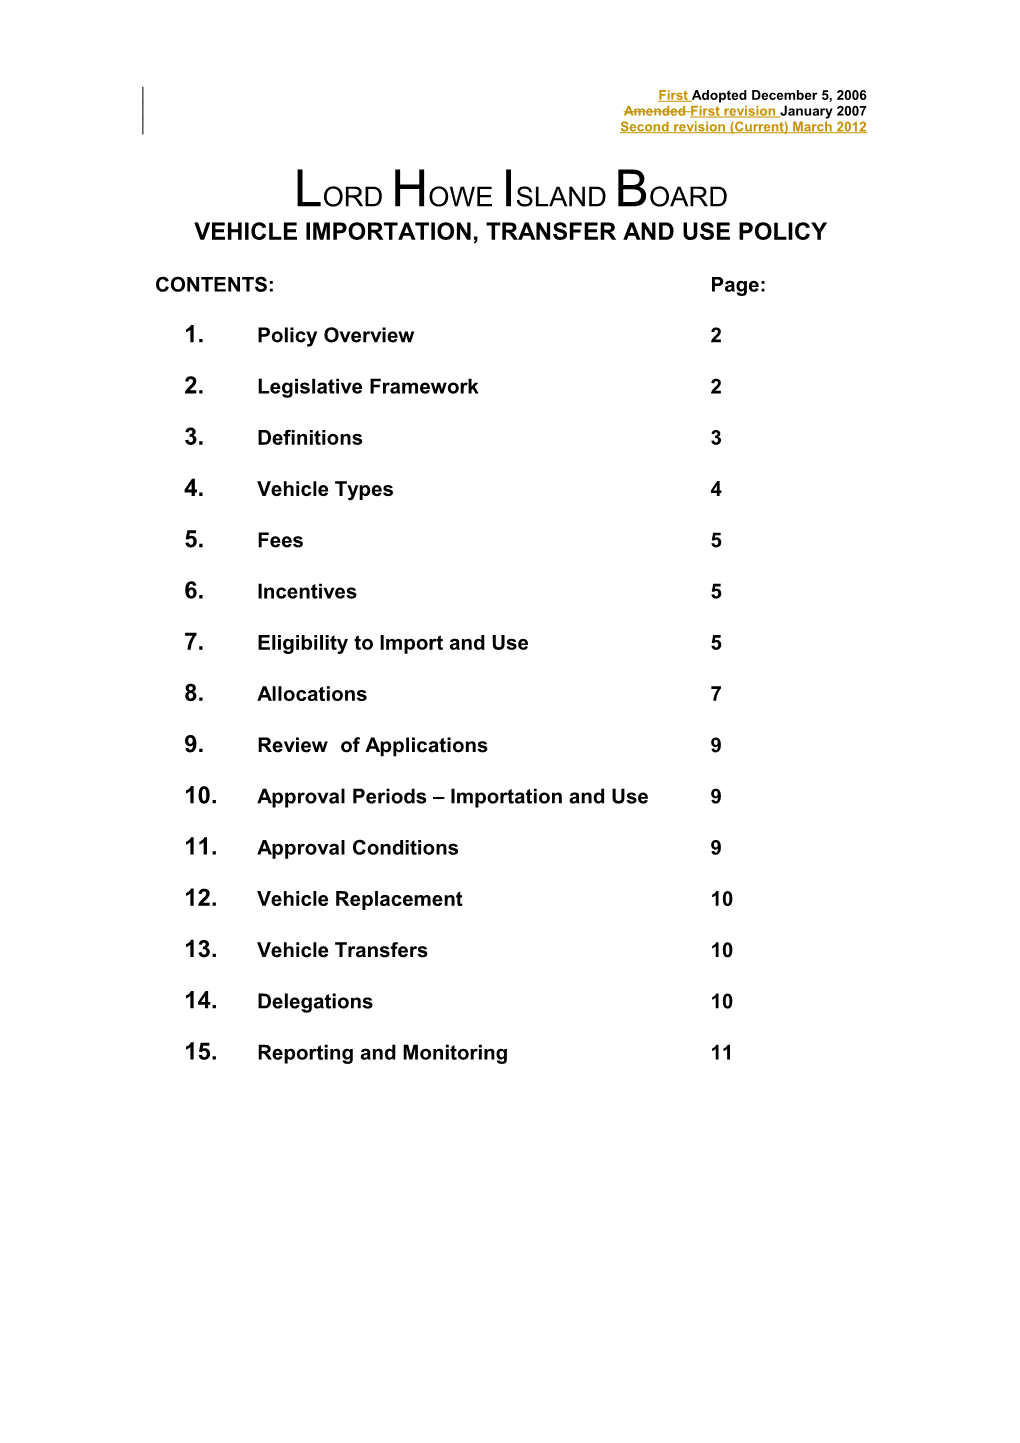 Vehicle Importation, Transfer and Use Policy